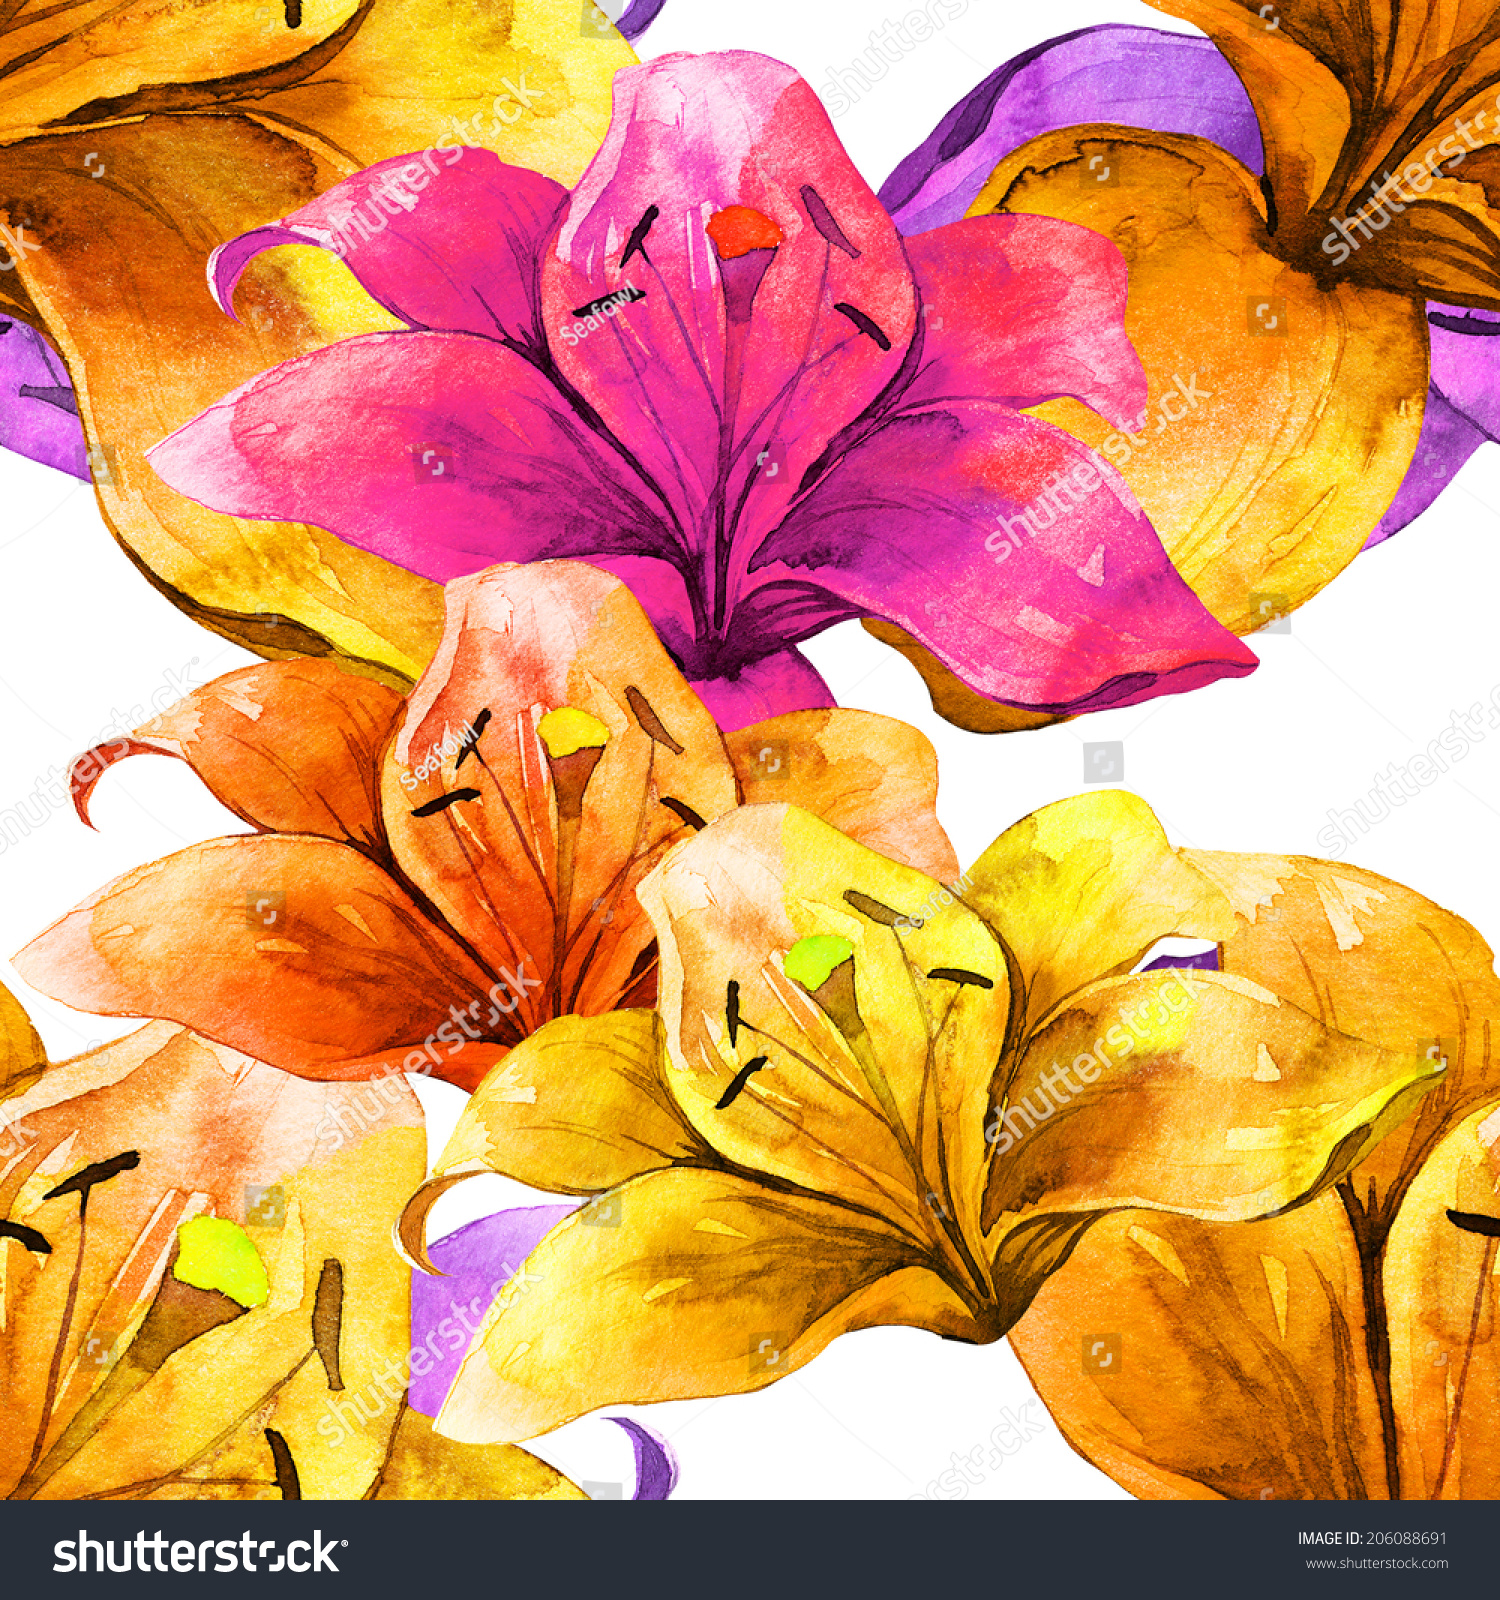 Watercolor Handmade Colorful Lilly Flowers Seamless Stock ...